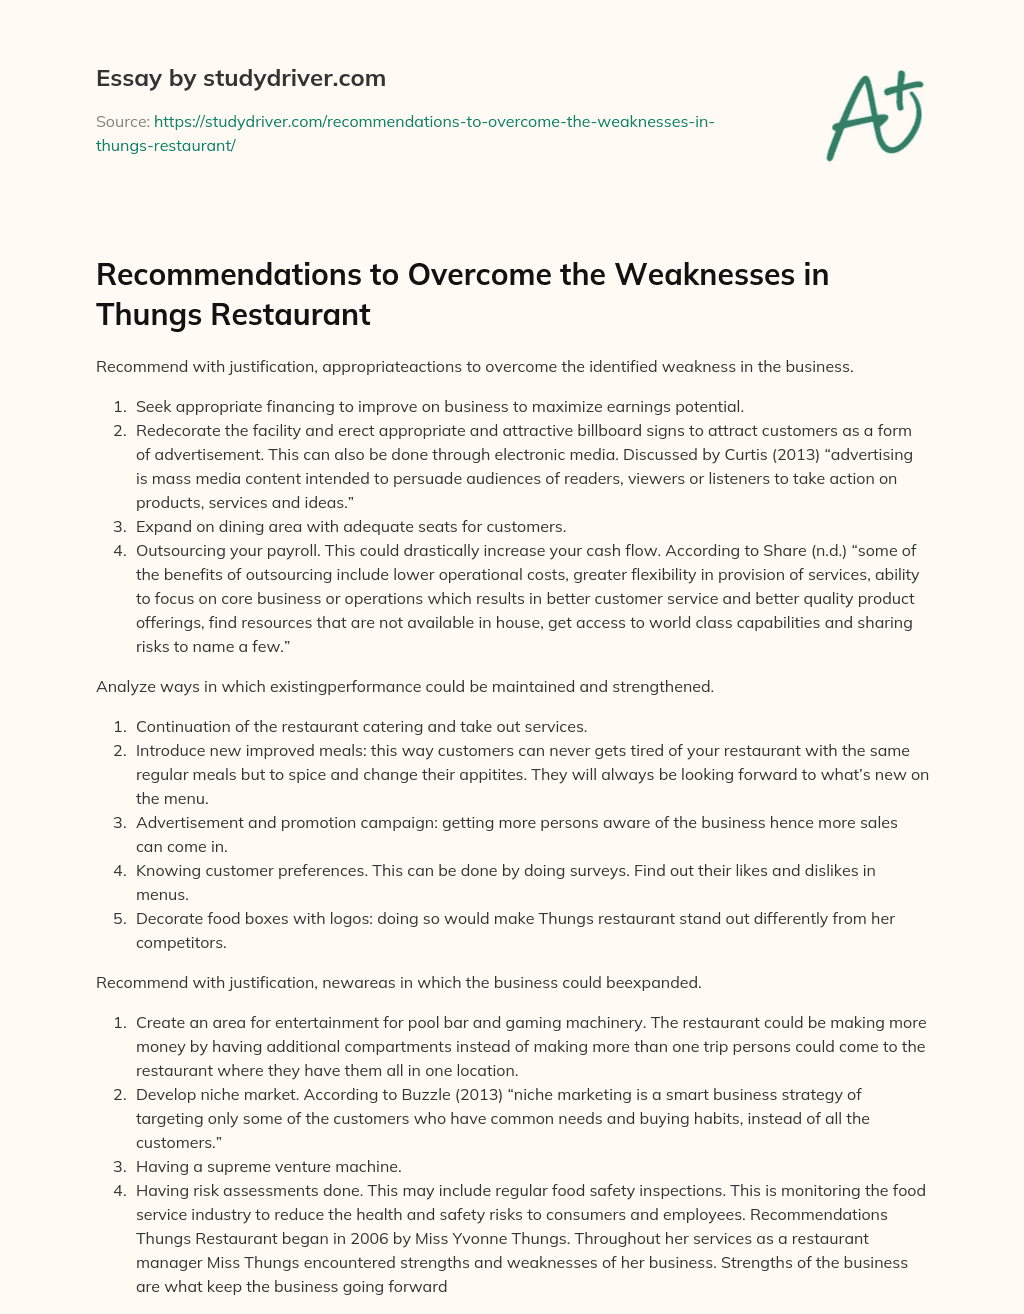 Recommendations to Overcome the Weaknesses in Thungs Restaurant essay